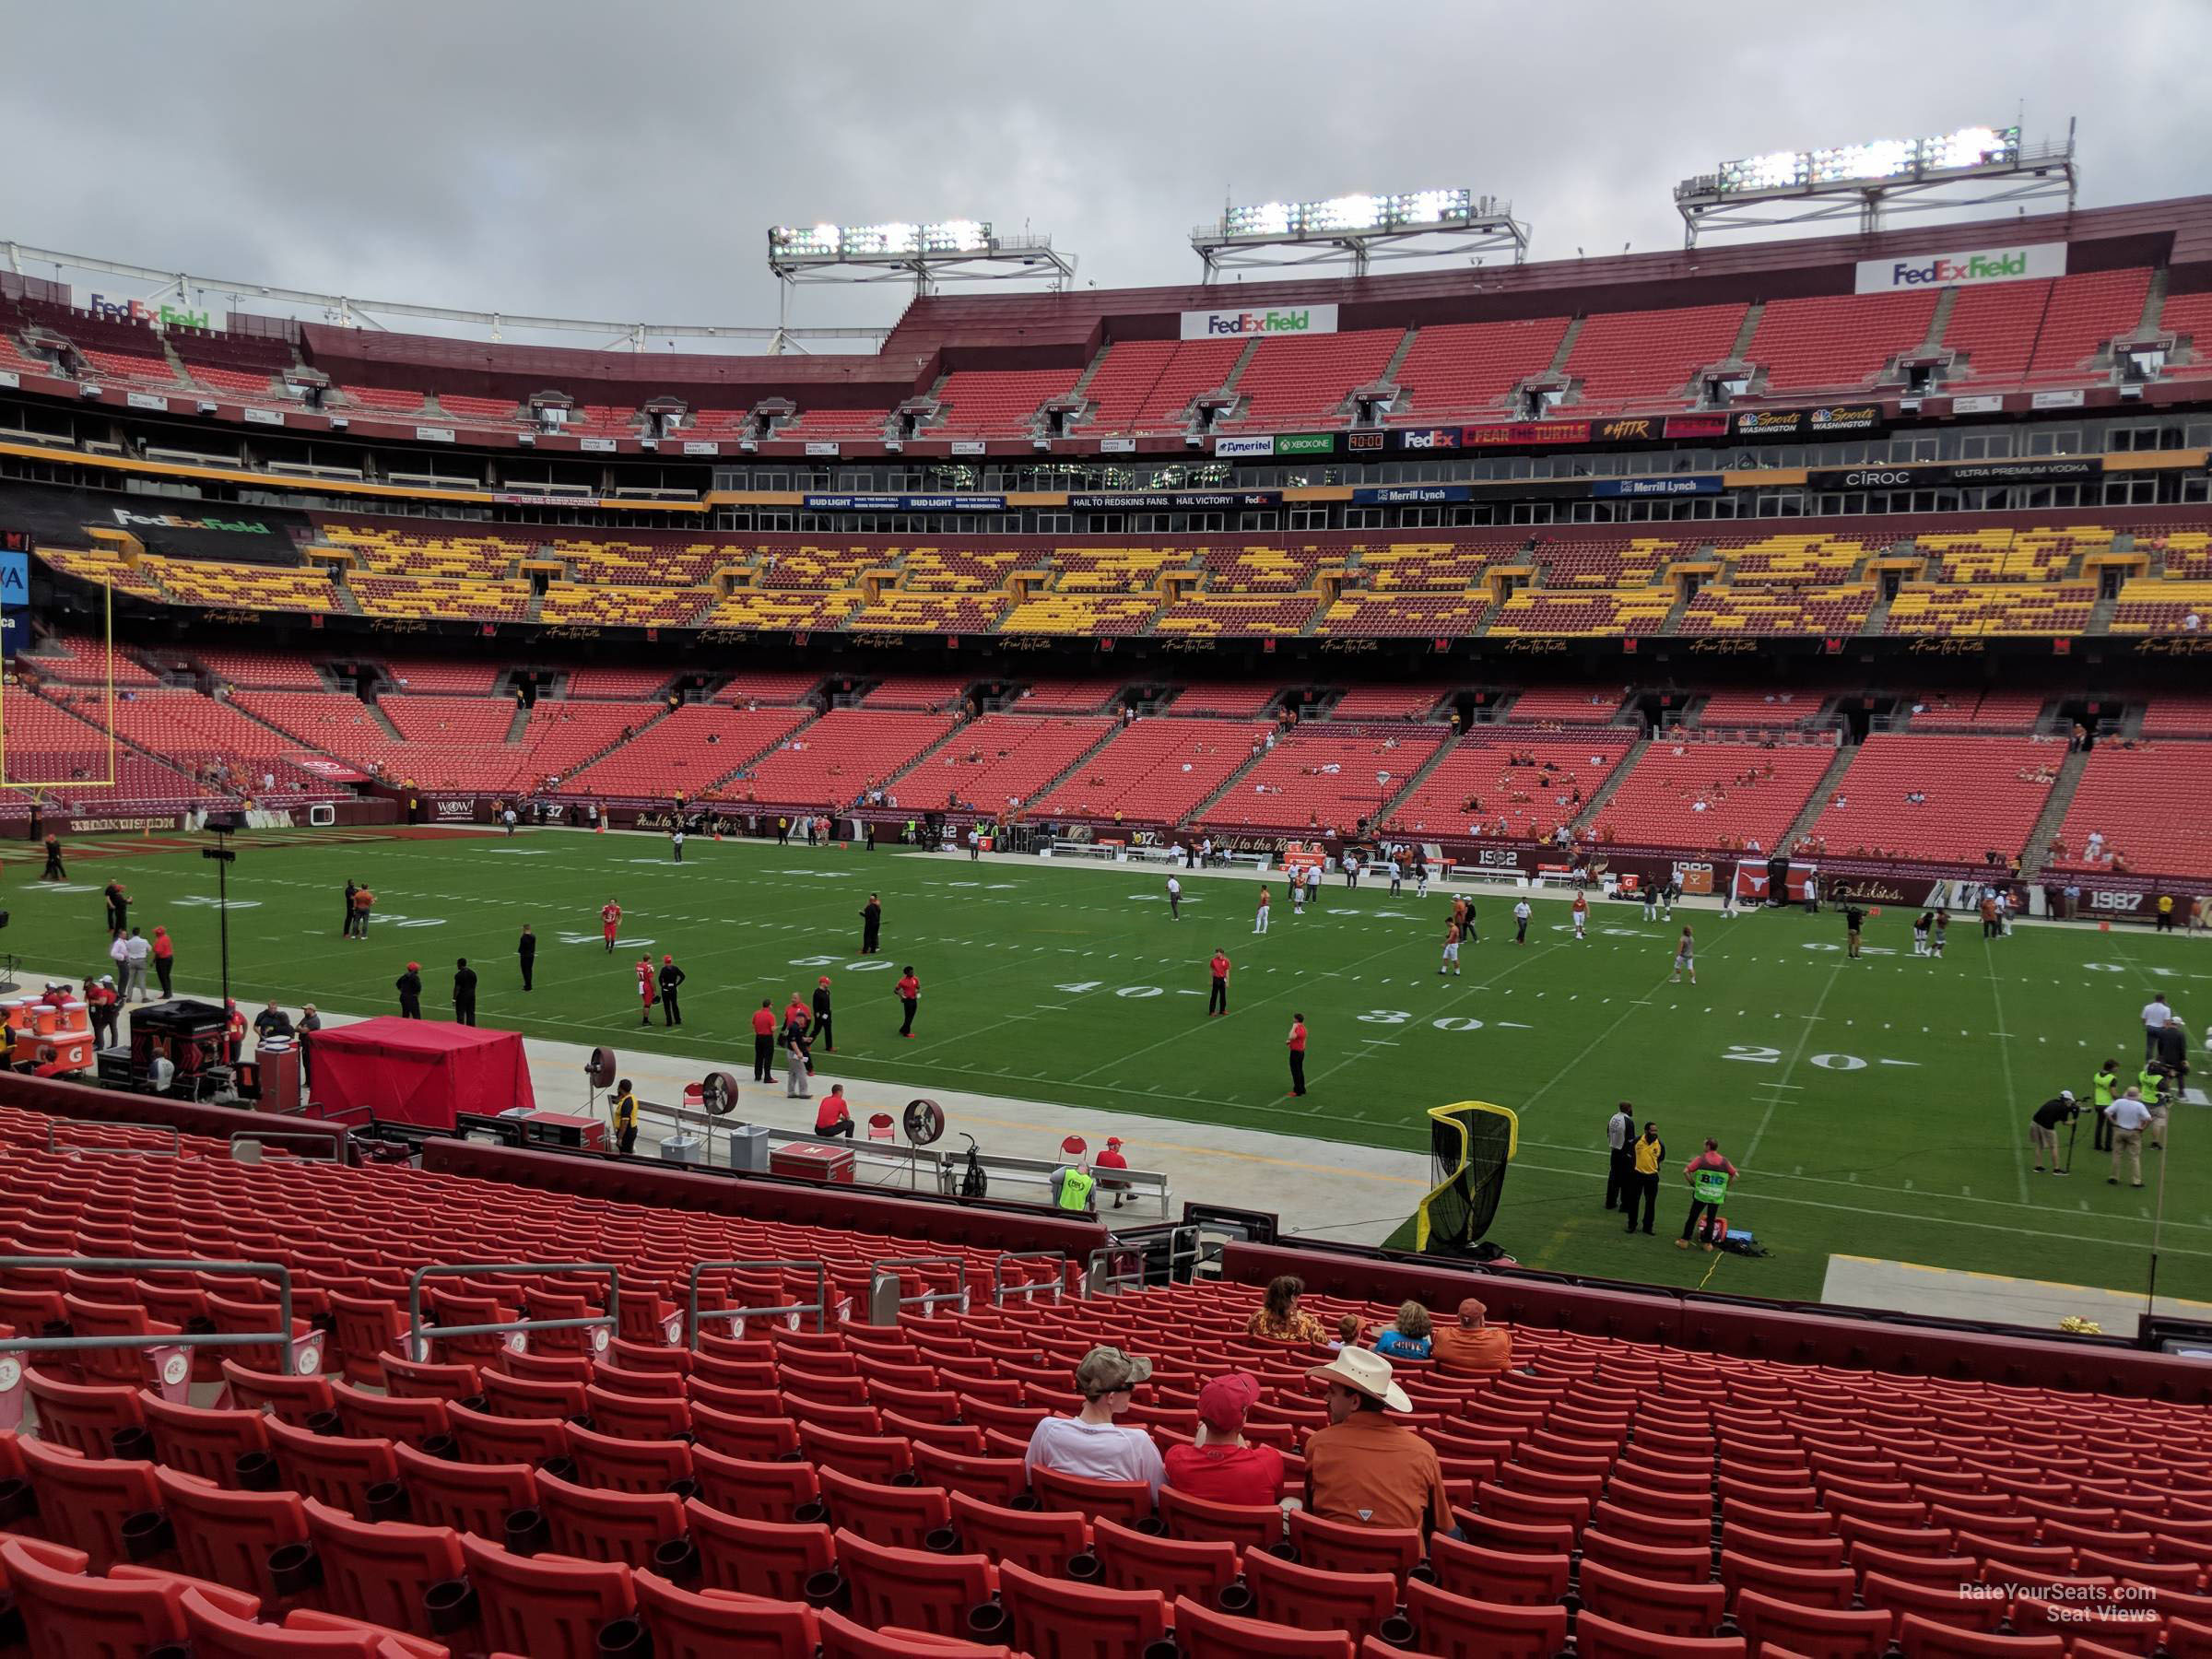 section 140, row 25 seat view  - fedexfield